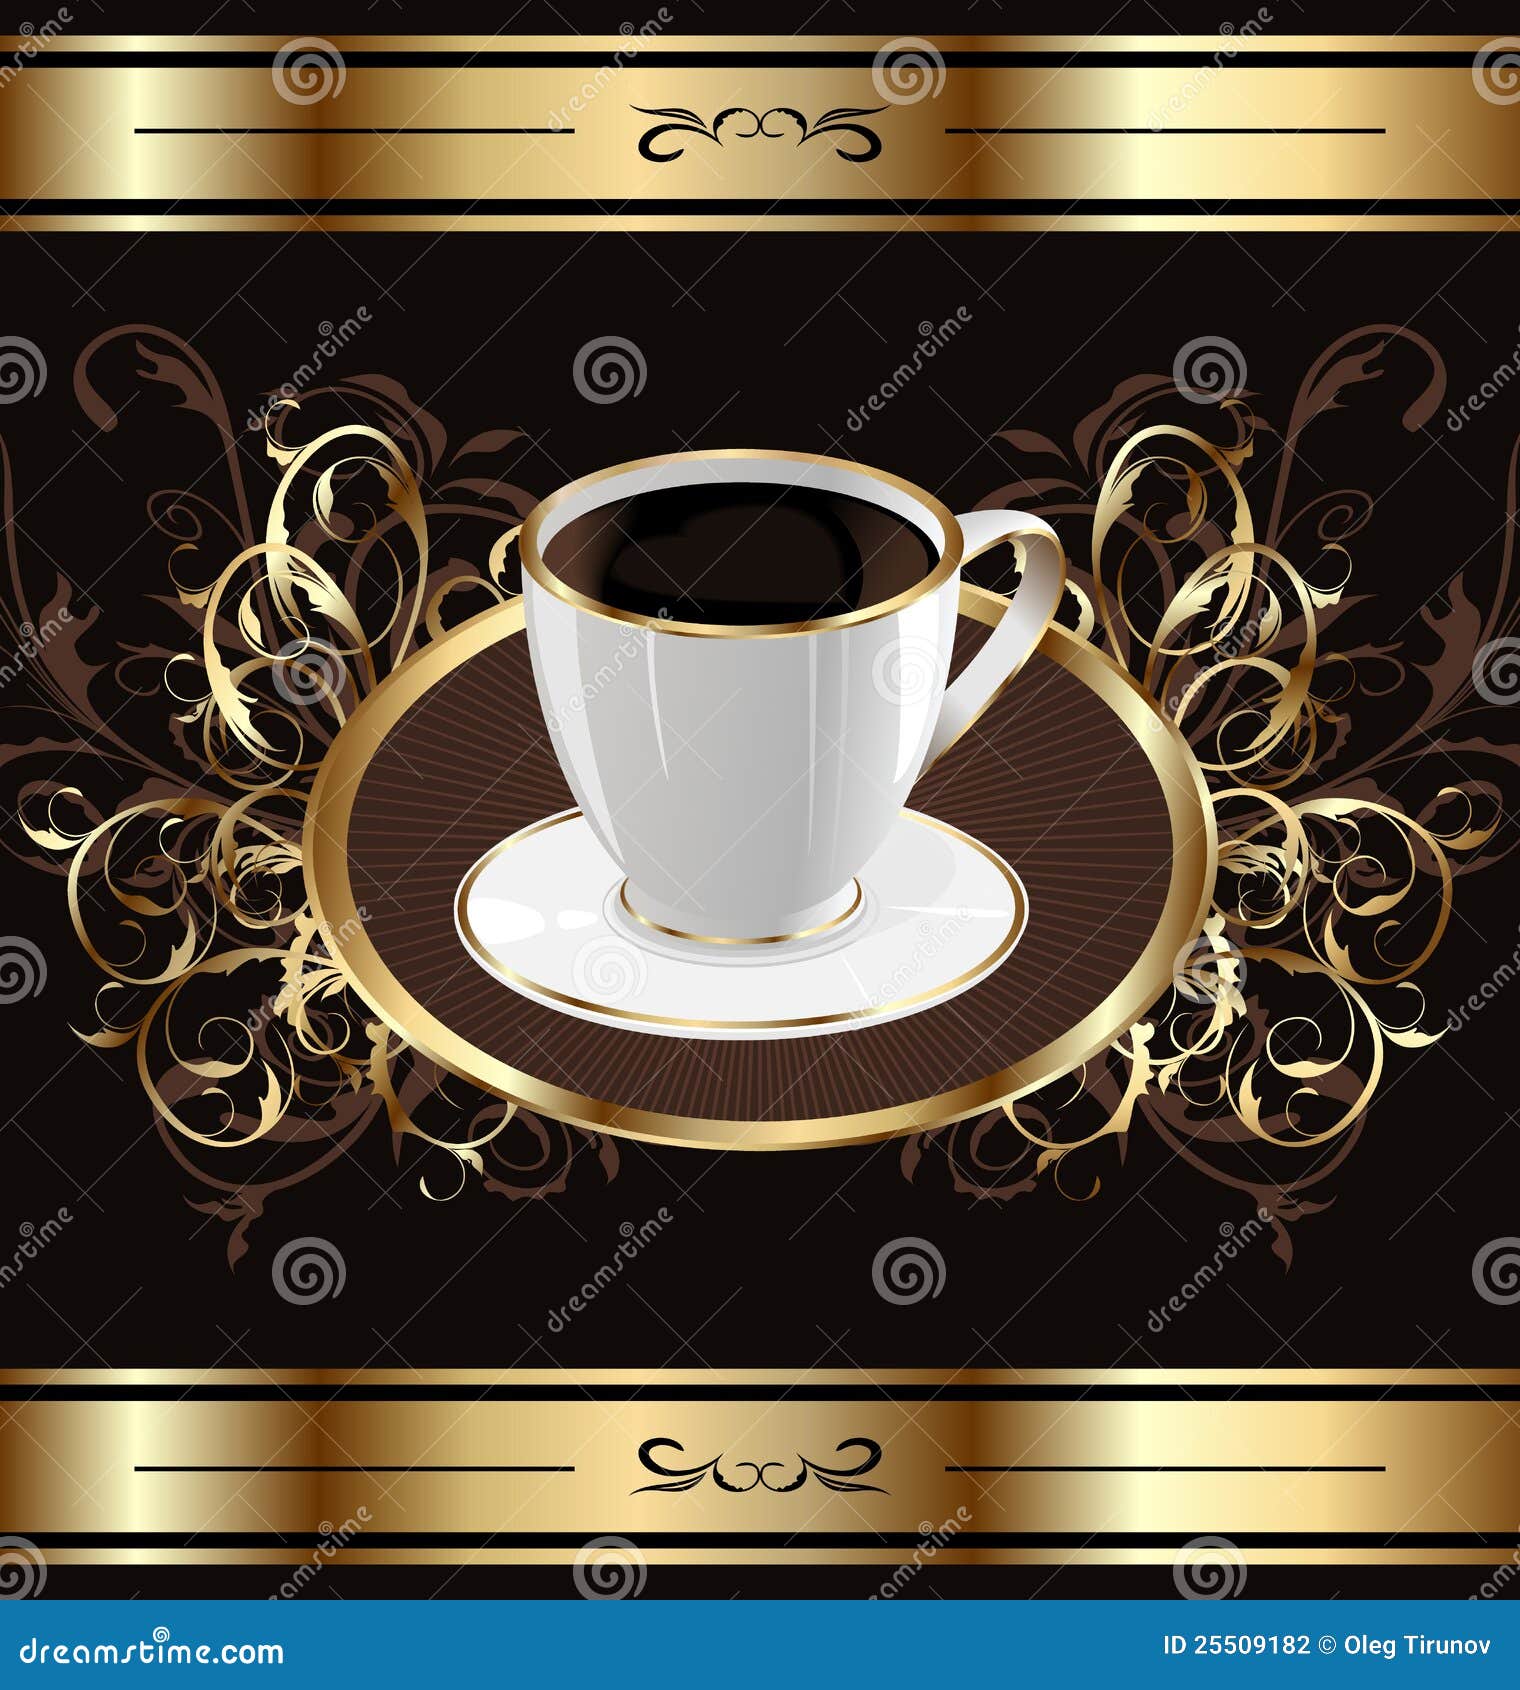 cup Vintage For Coffee, Coffee Photography  vintage Cup  Stock coffee Background  Packing